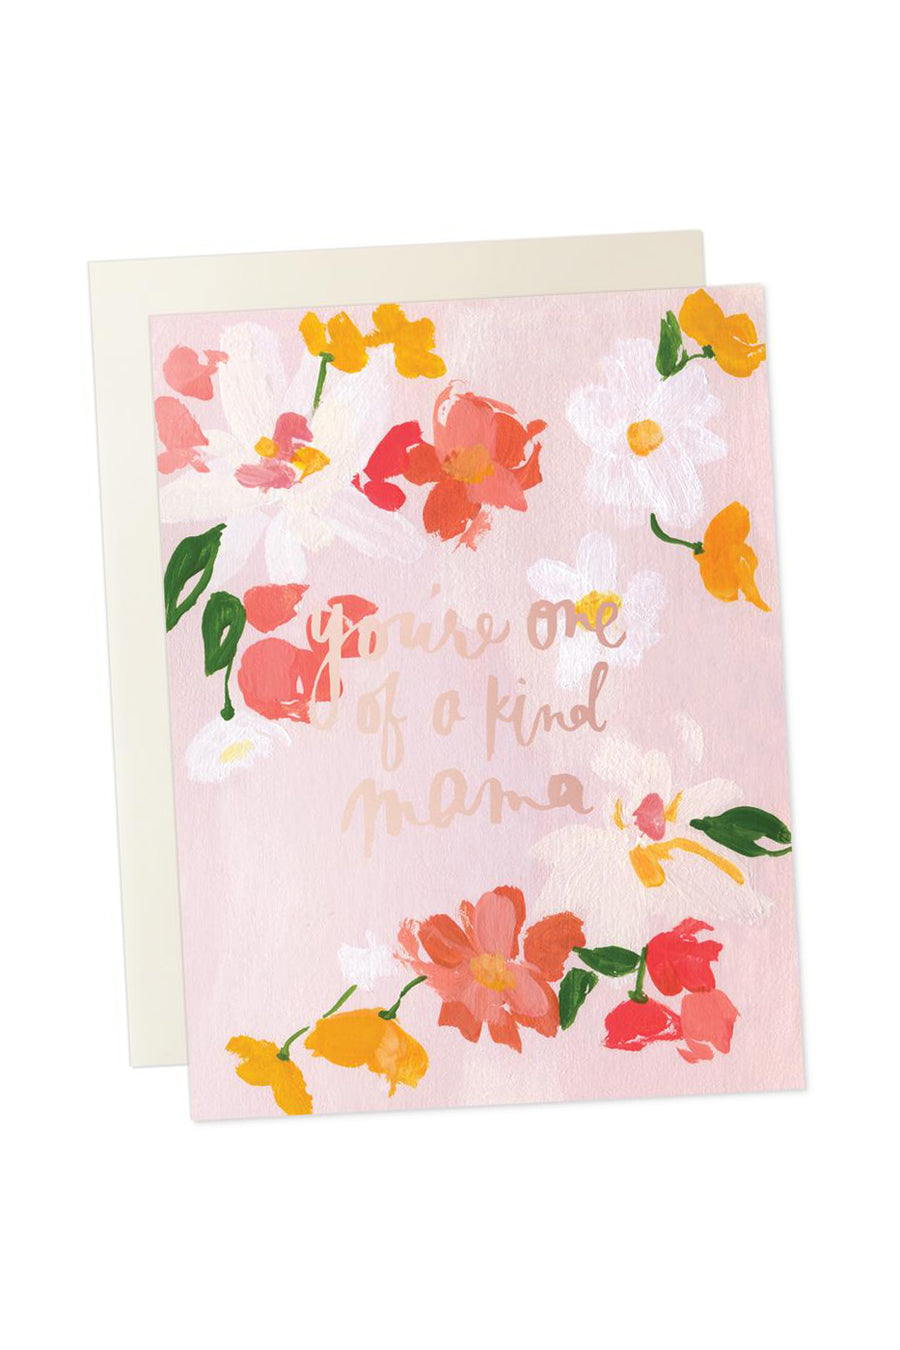 You're One of a Kind Mama Card